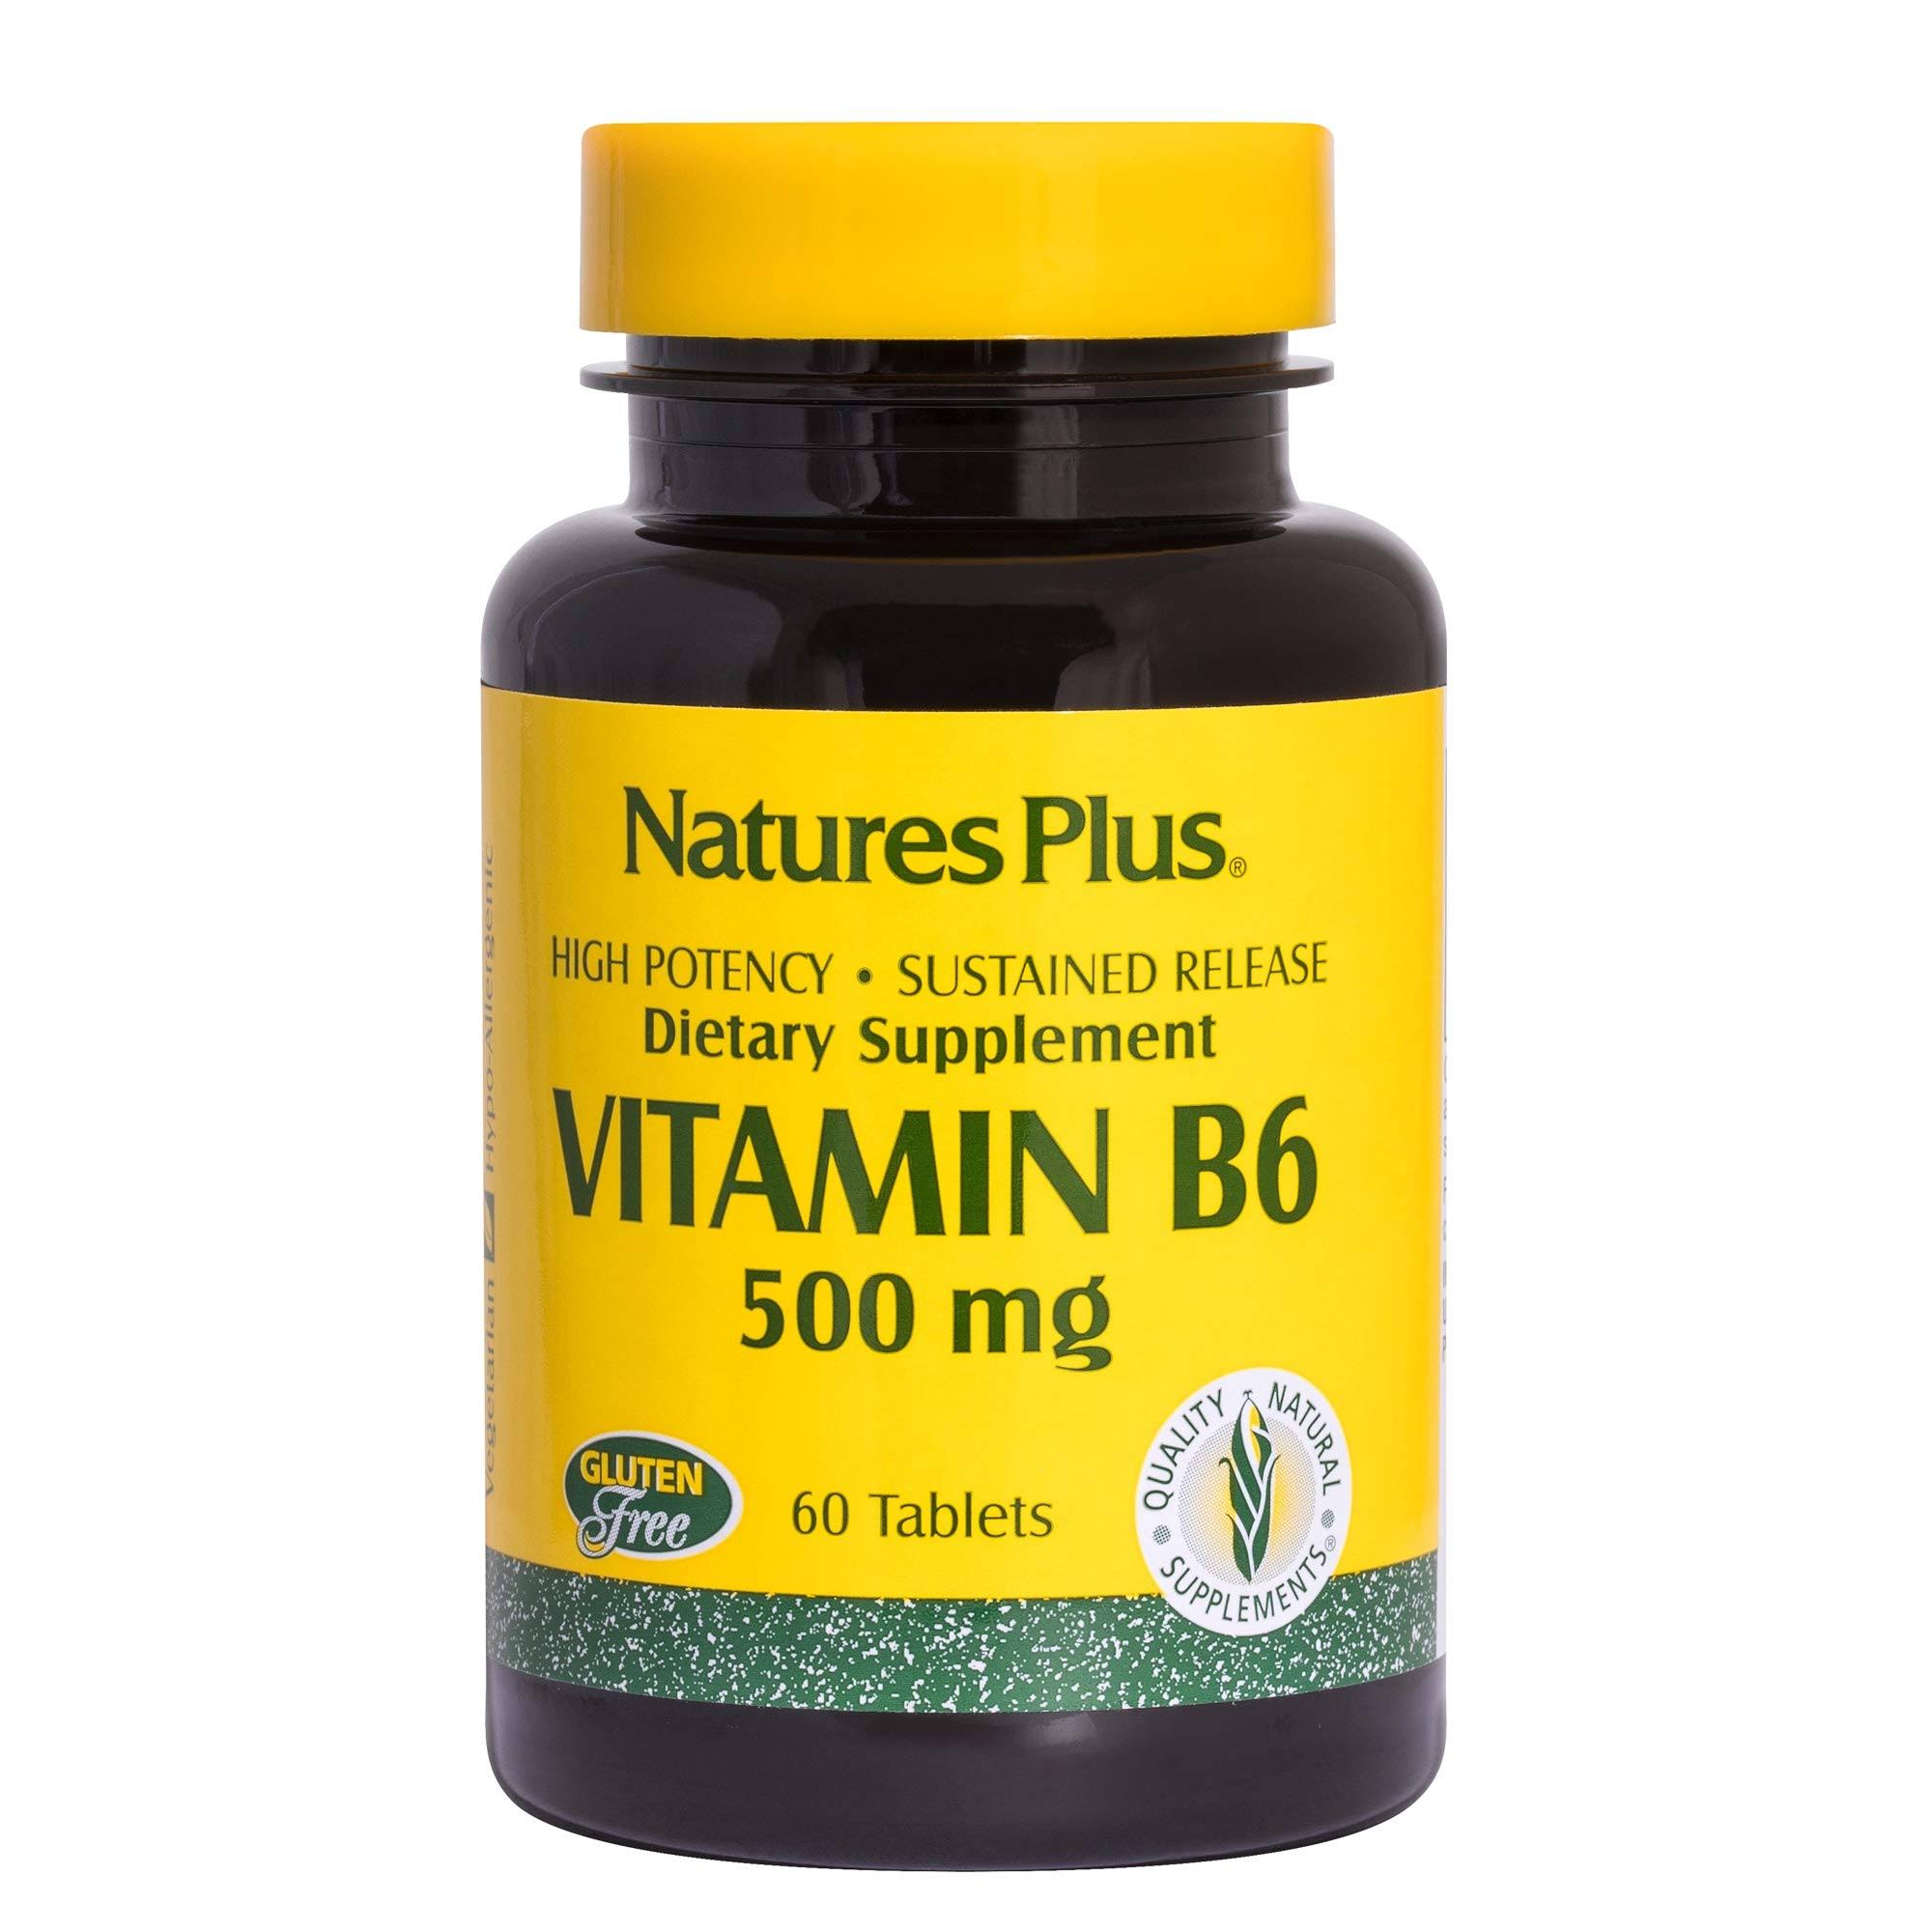 Nature's Plus Vitamin B6 Sustained Release 500 mg 60 Tablets